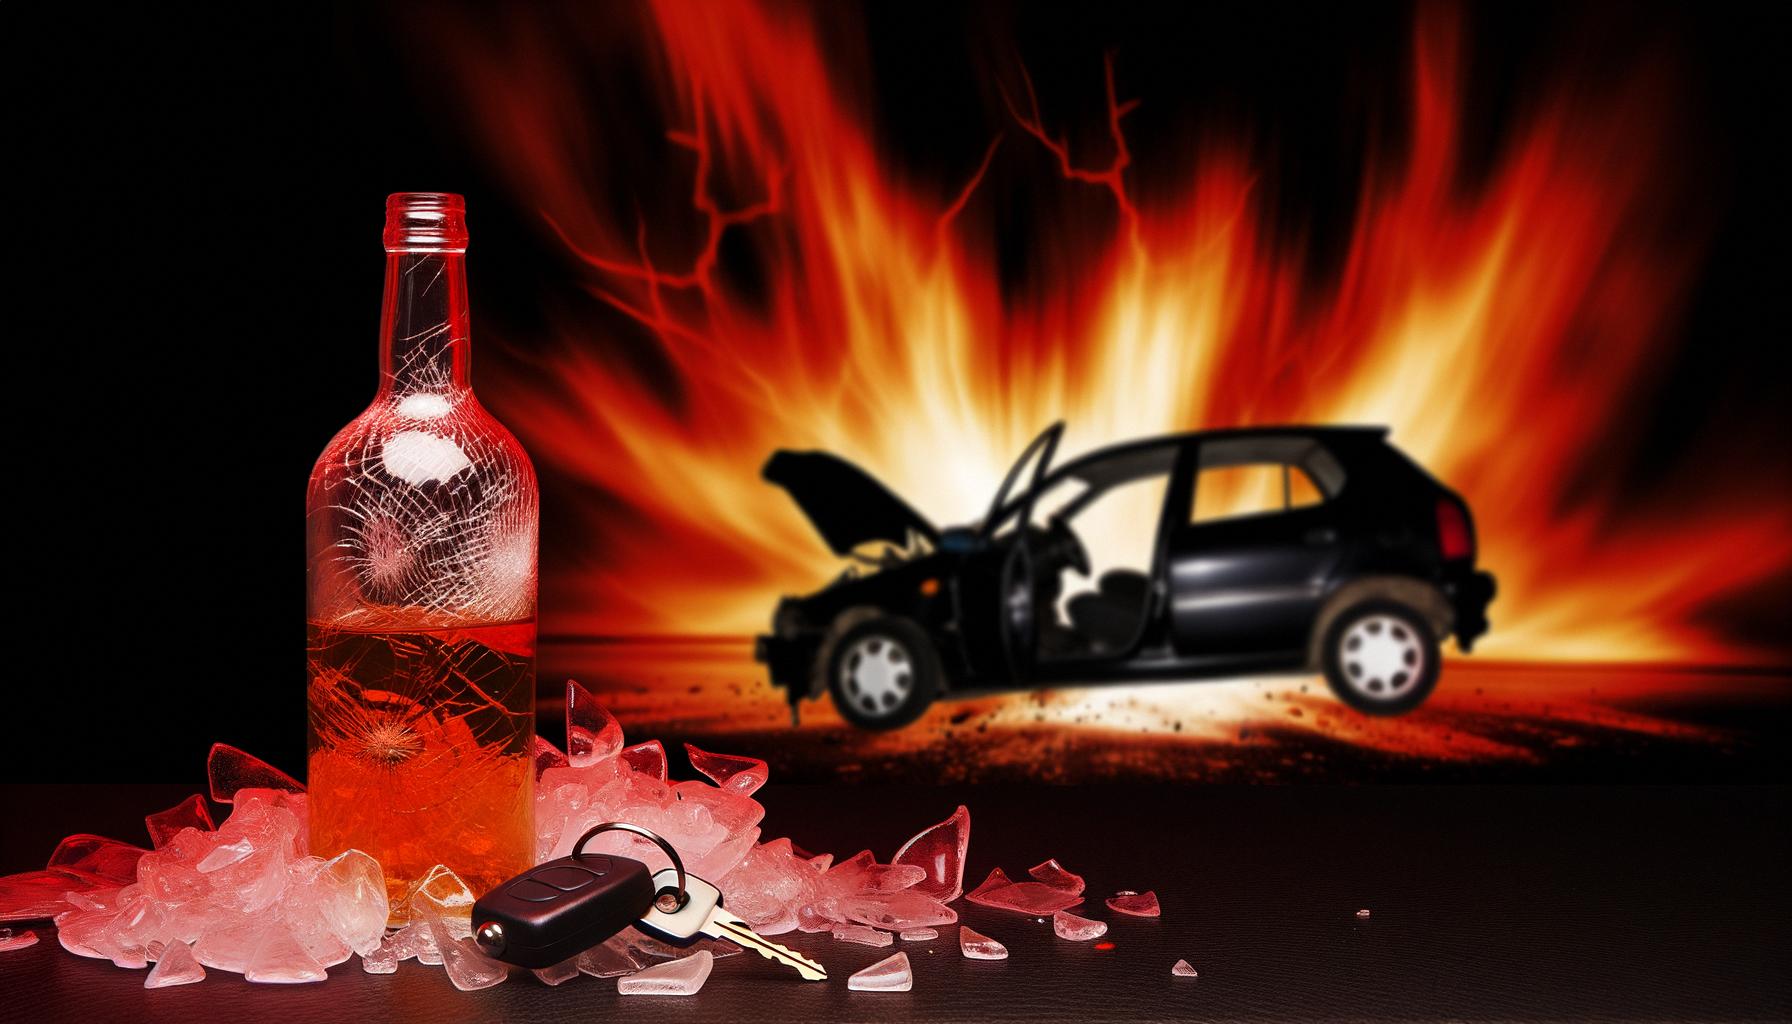 Drunk driving remains a critical, deadly issue sparking education and stricter laws.